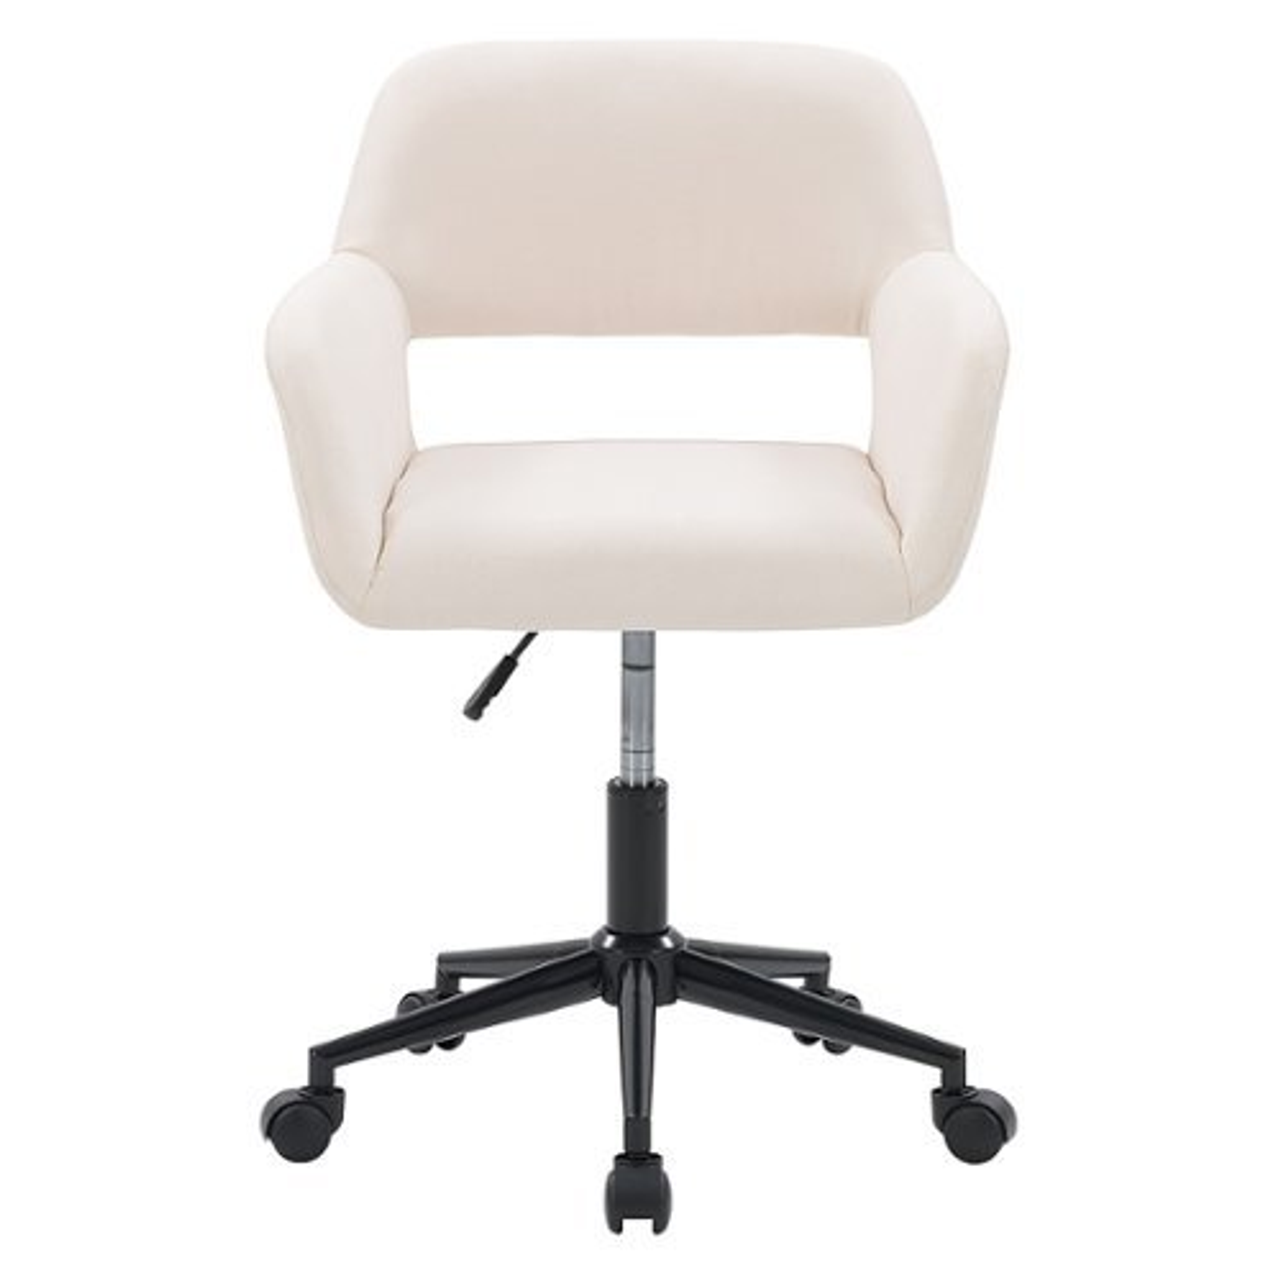 CorLiving Marlowe Upholstered Task Chair - Off White